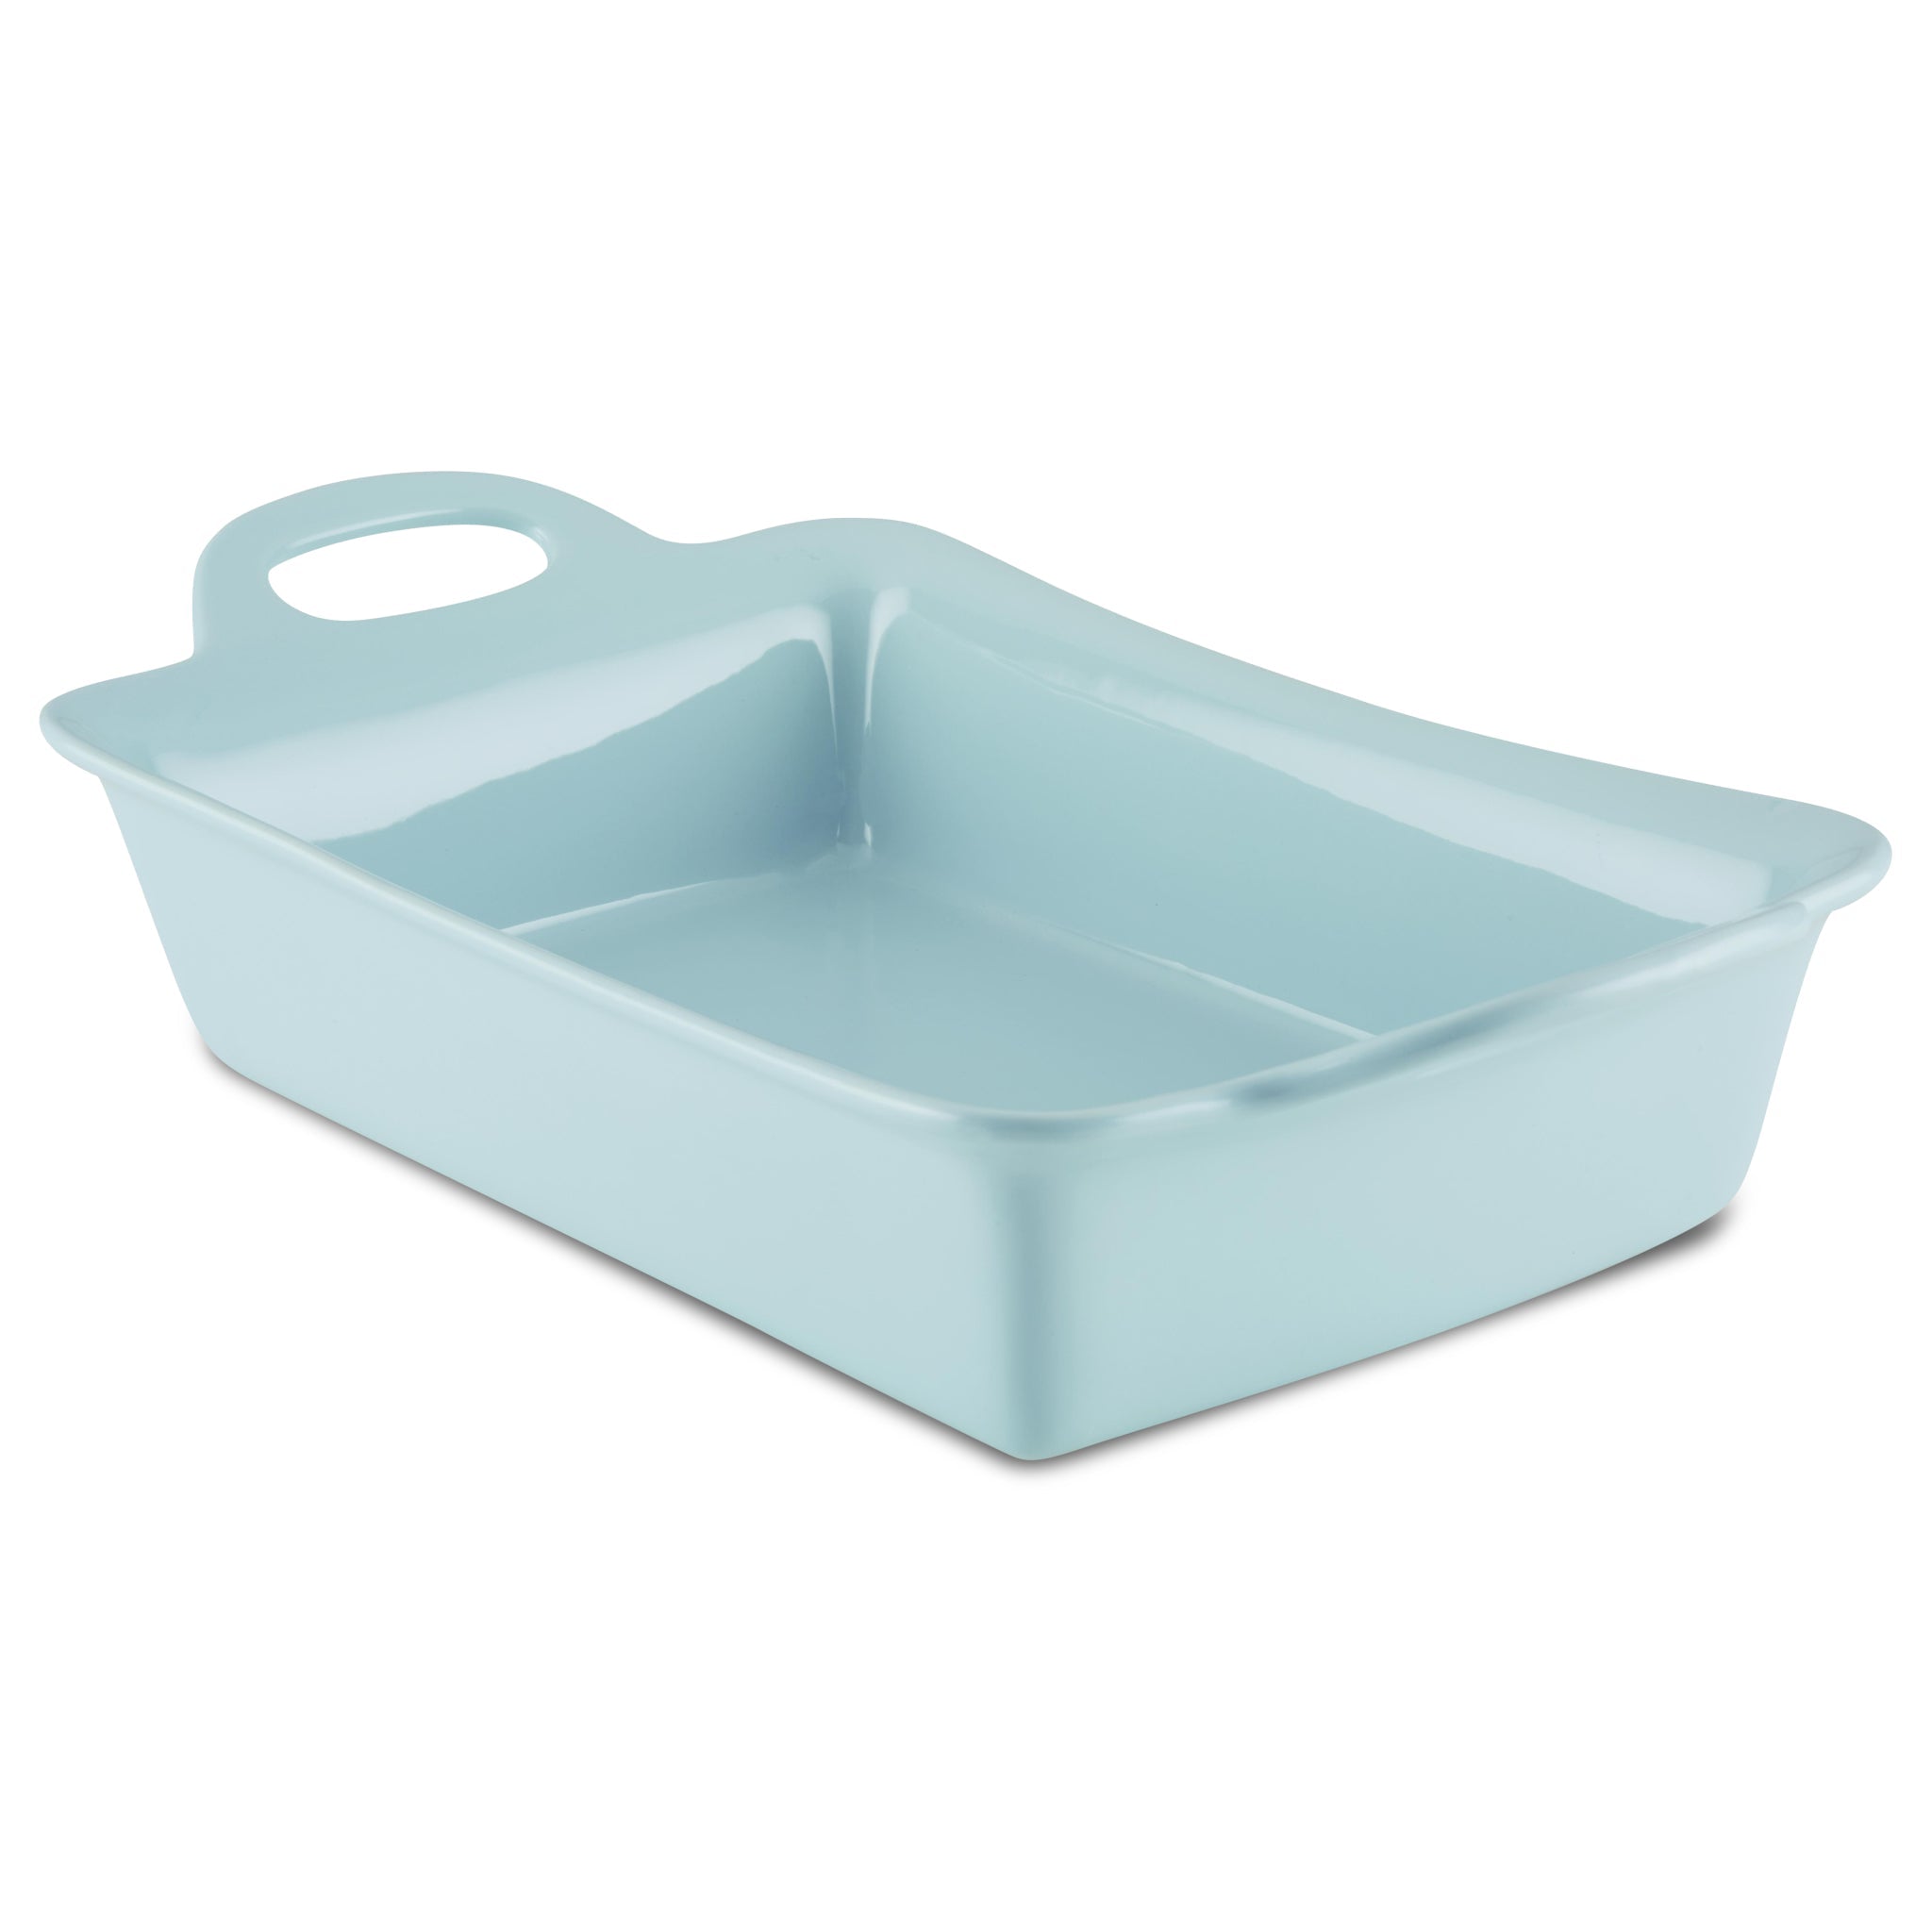 Rachael Ray Ceramic Casserole Bakers with Shared Lid Set, 3-Piece, Agave Blue